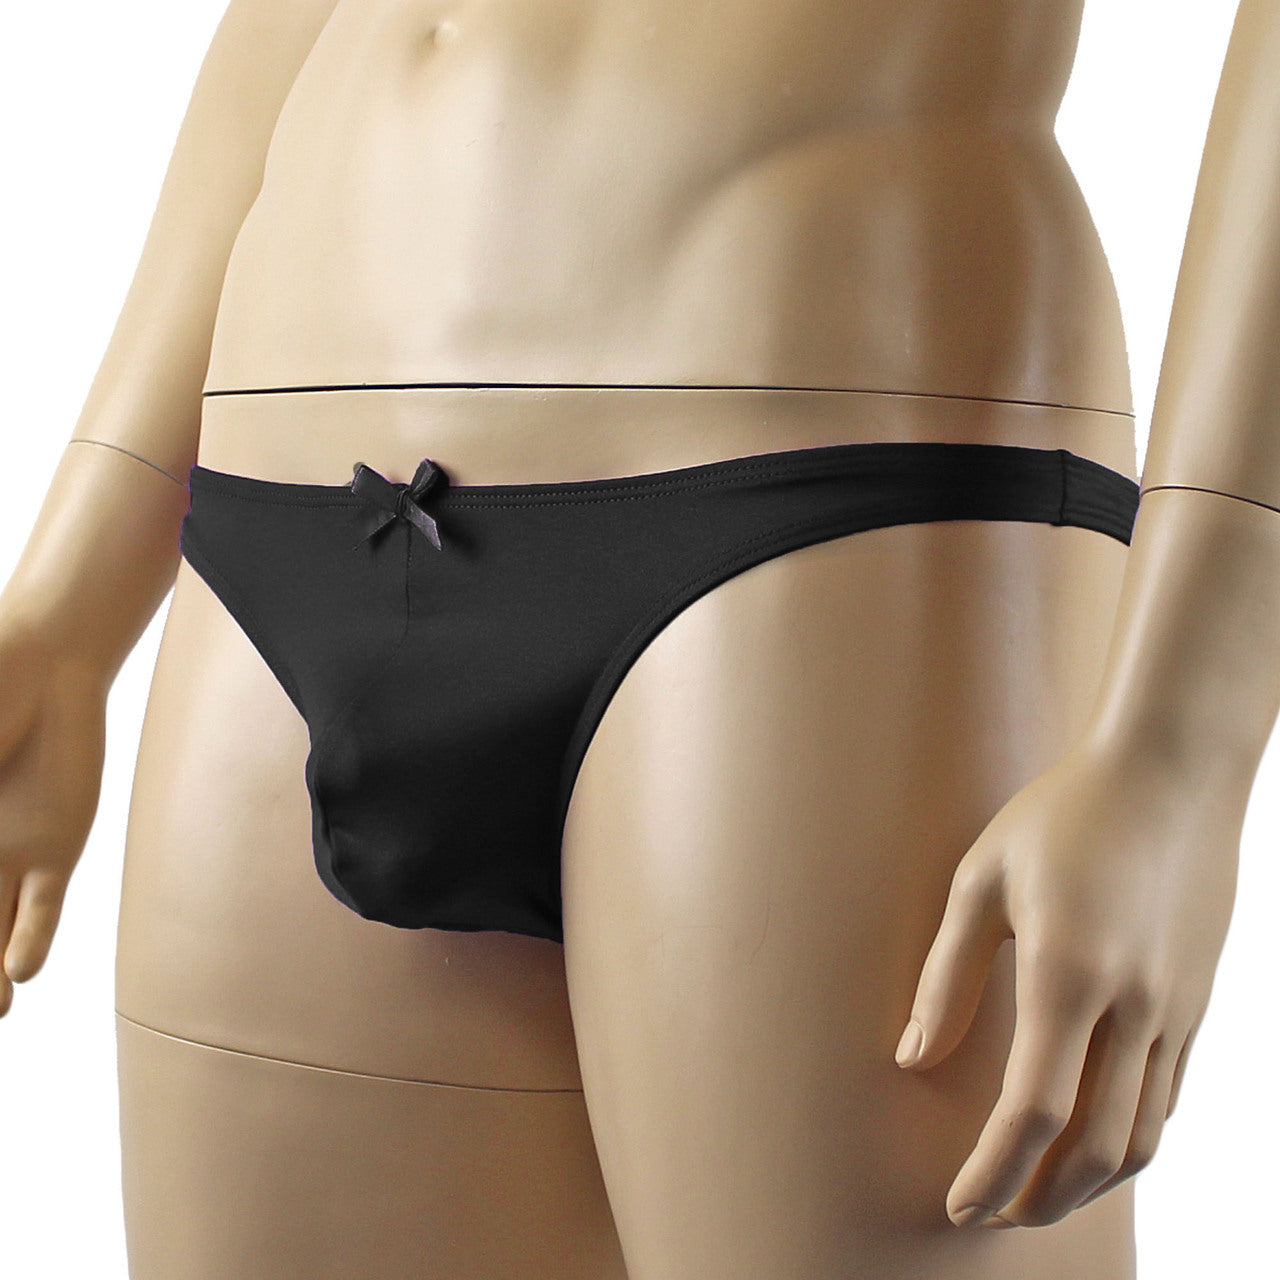 Male Angel Lingerie Stretch Spandex Thong with Bow Black